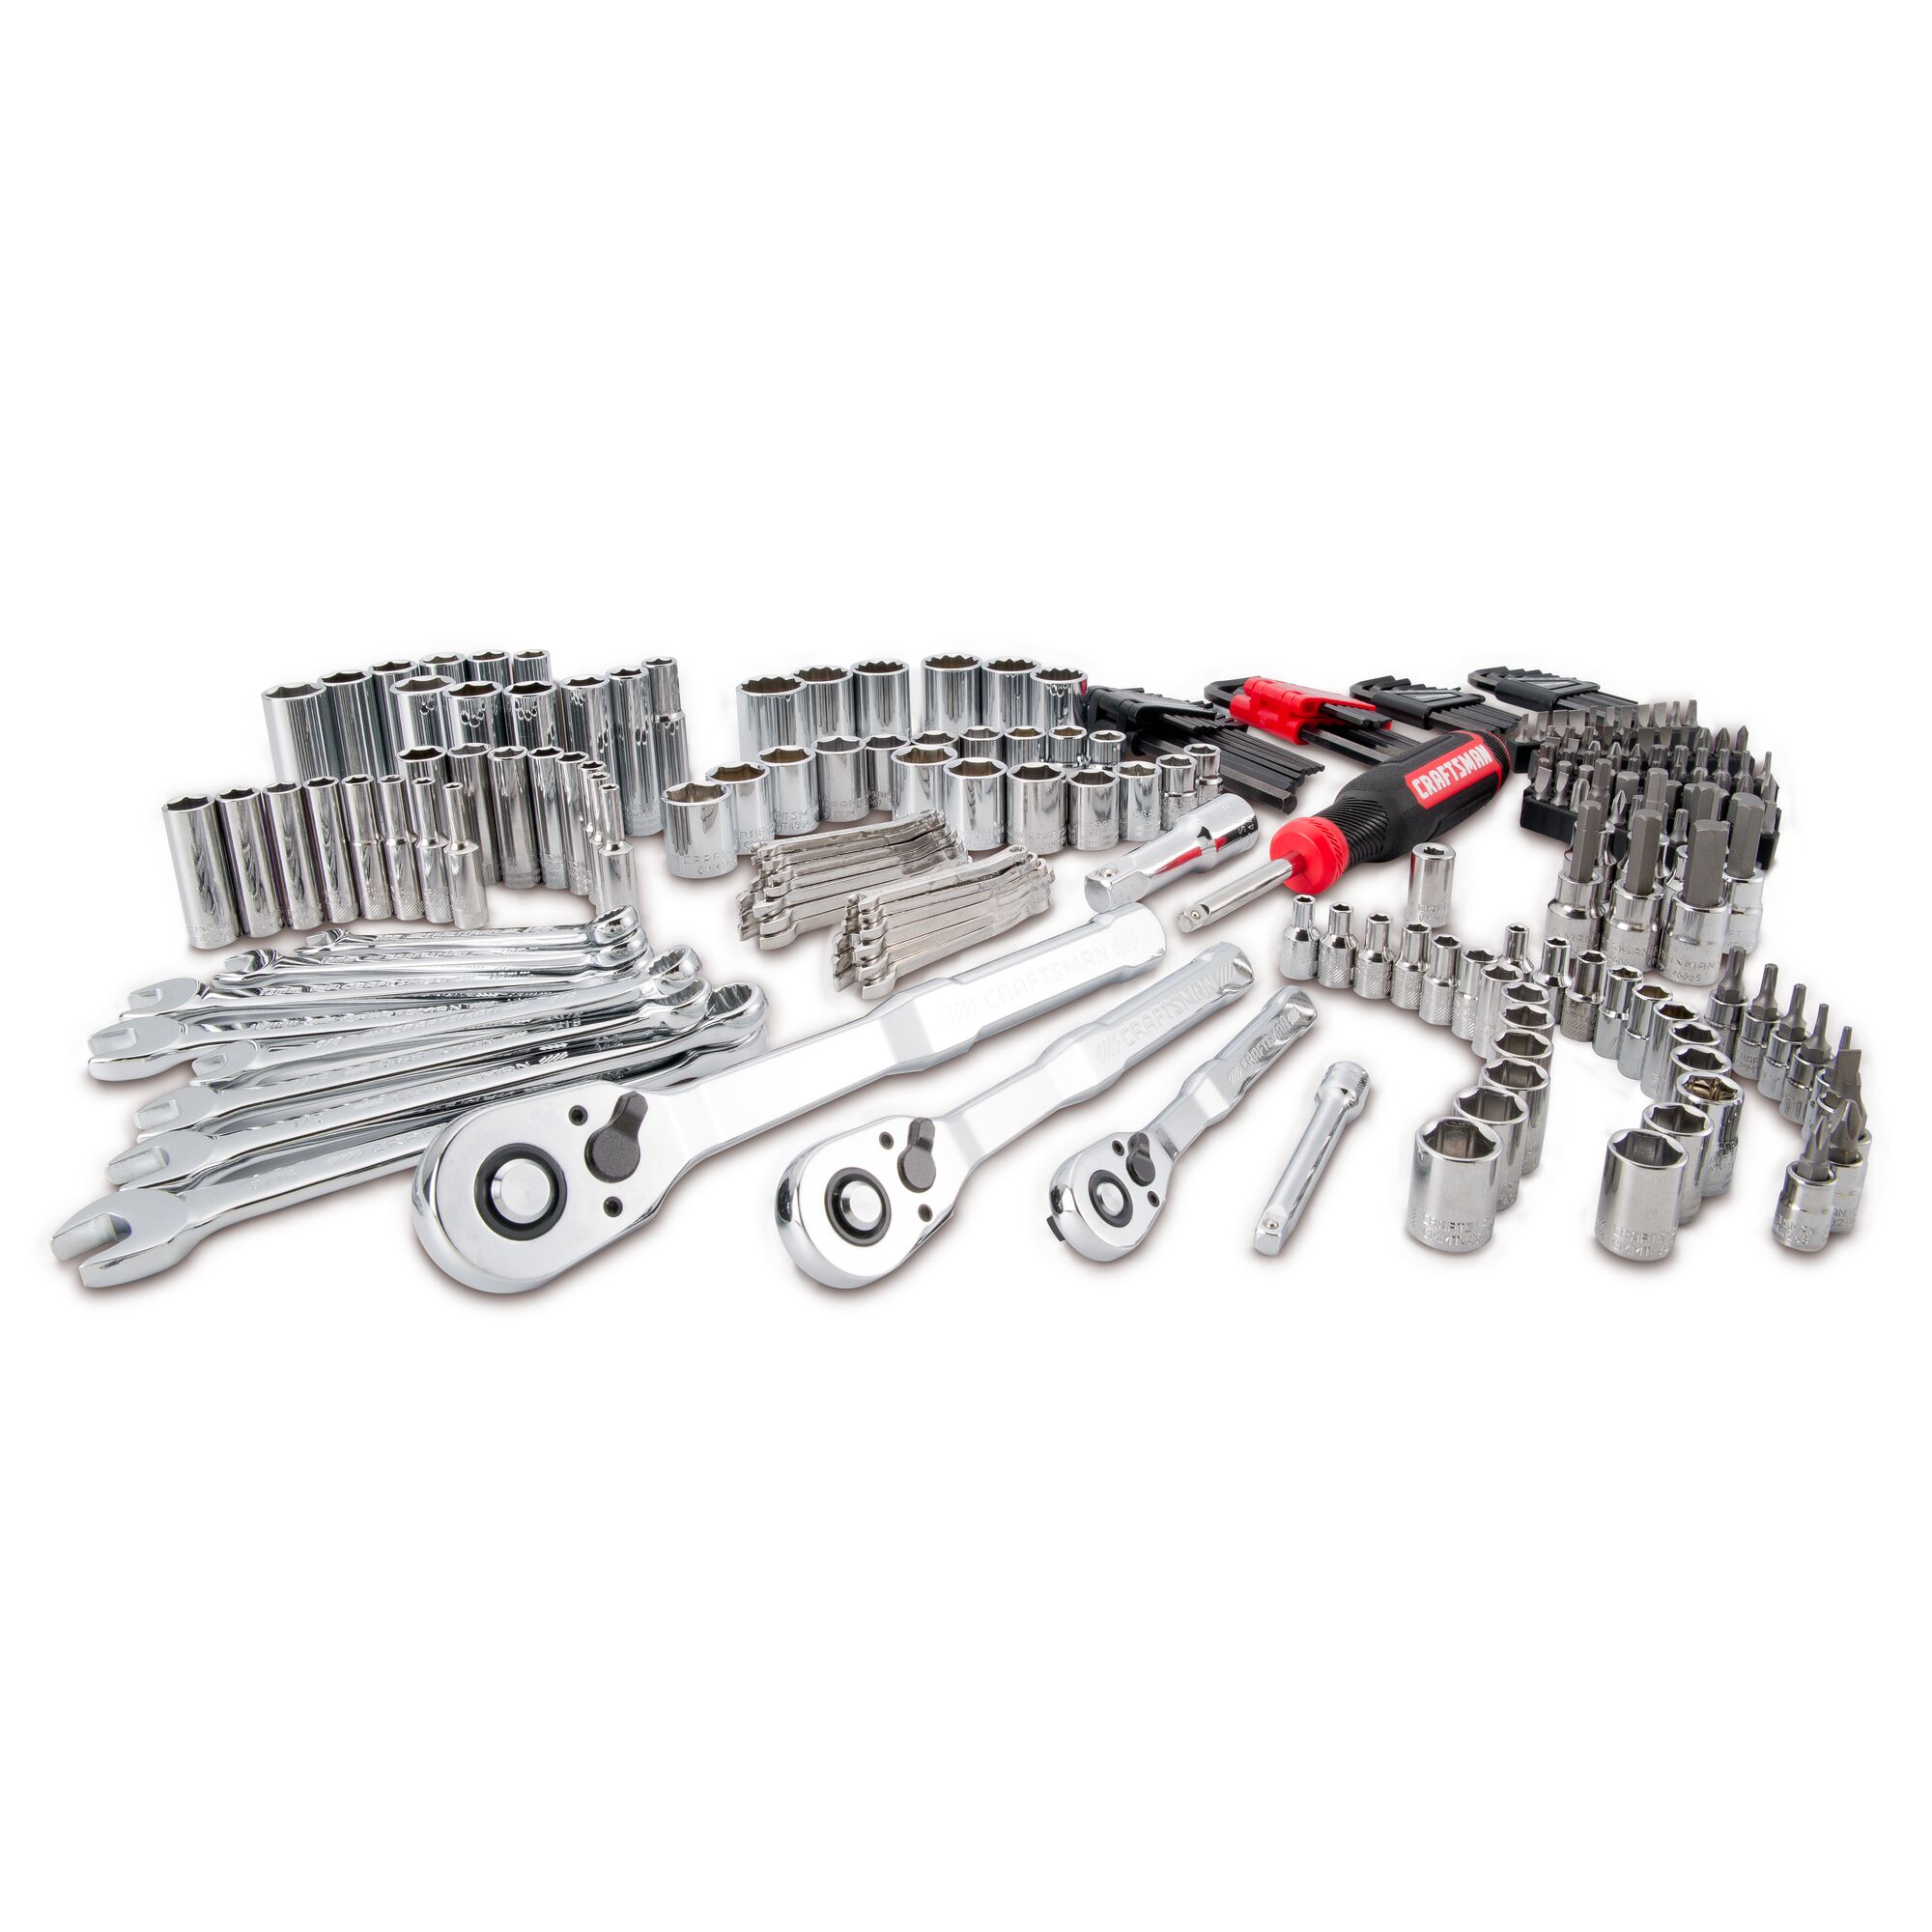 View of CRAFTSMAN Mechanics Tool Set highlighting  product features